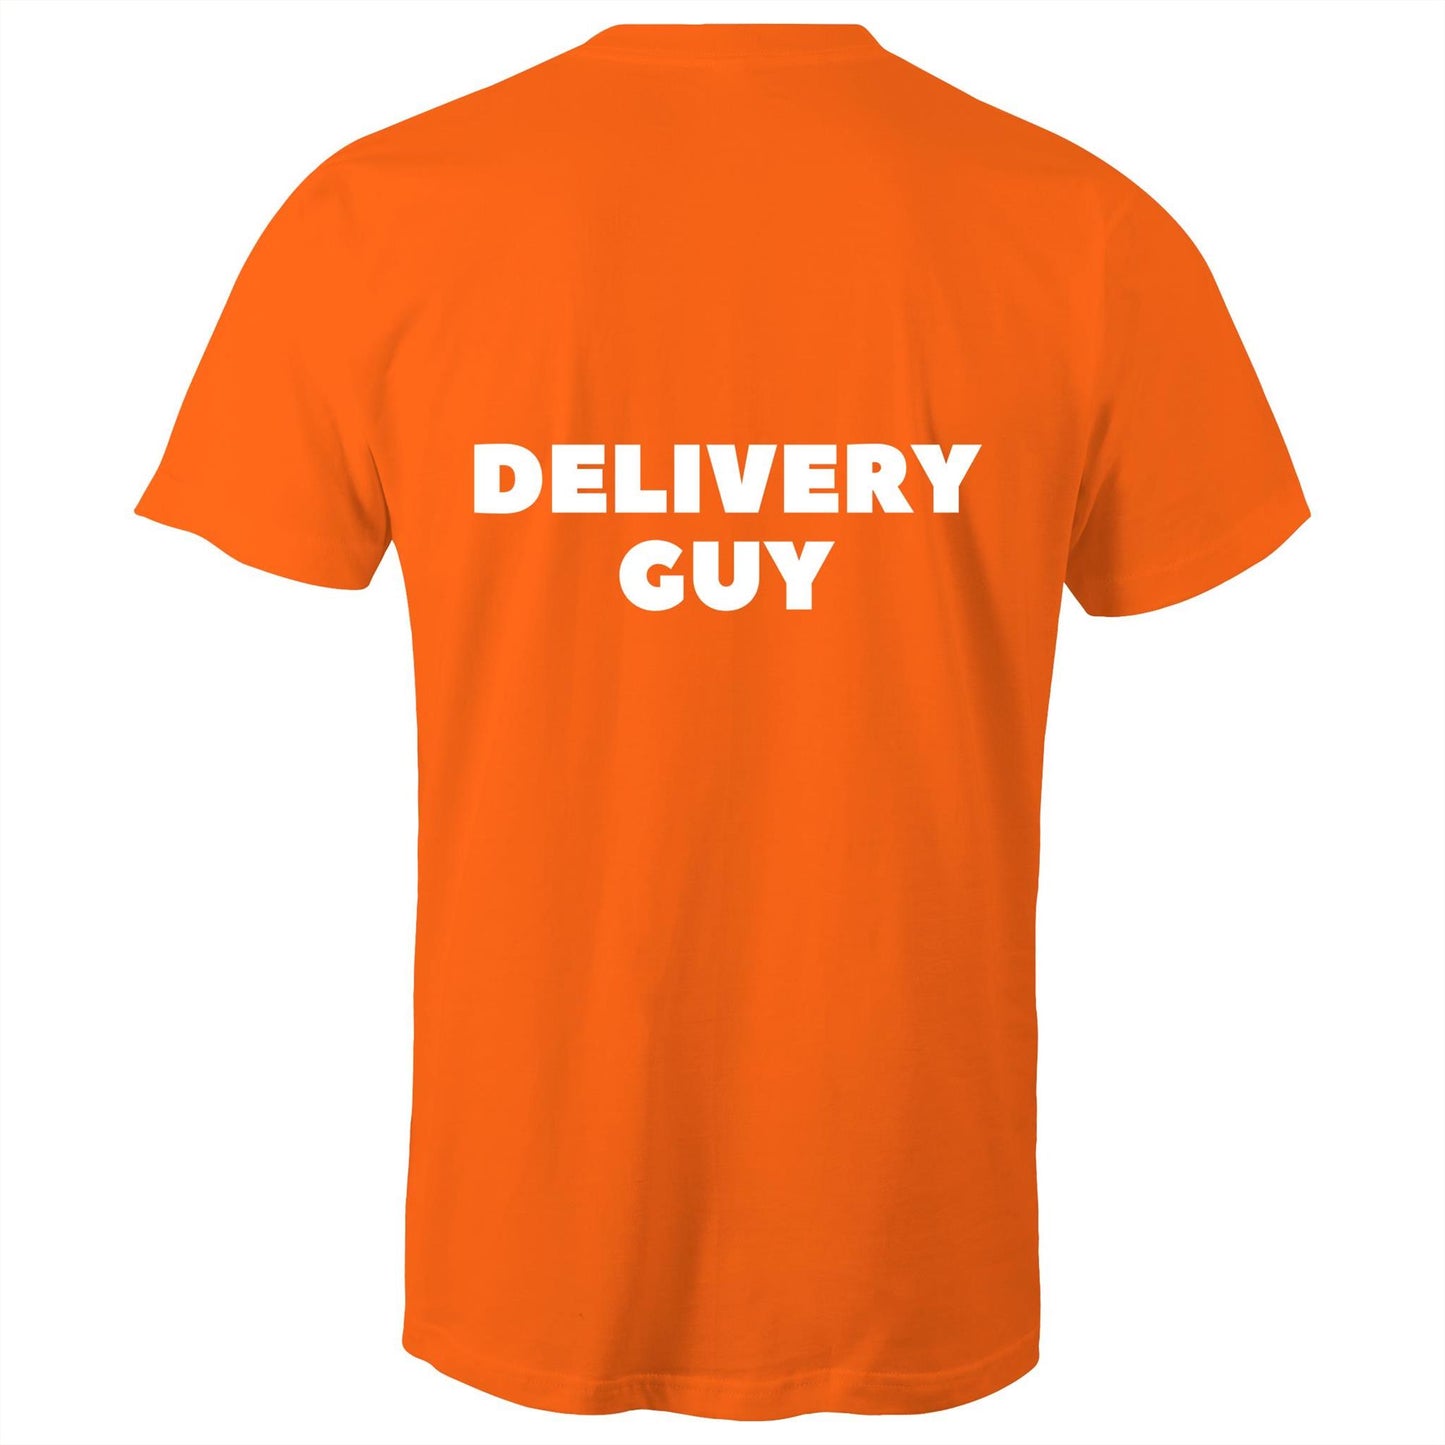 DELIVERY GUY - Mens T-Shirt